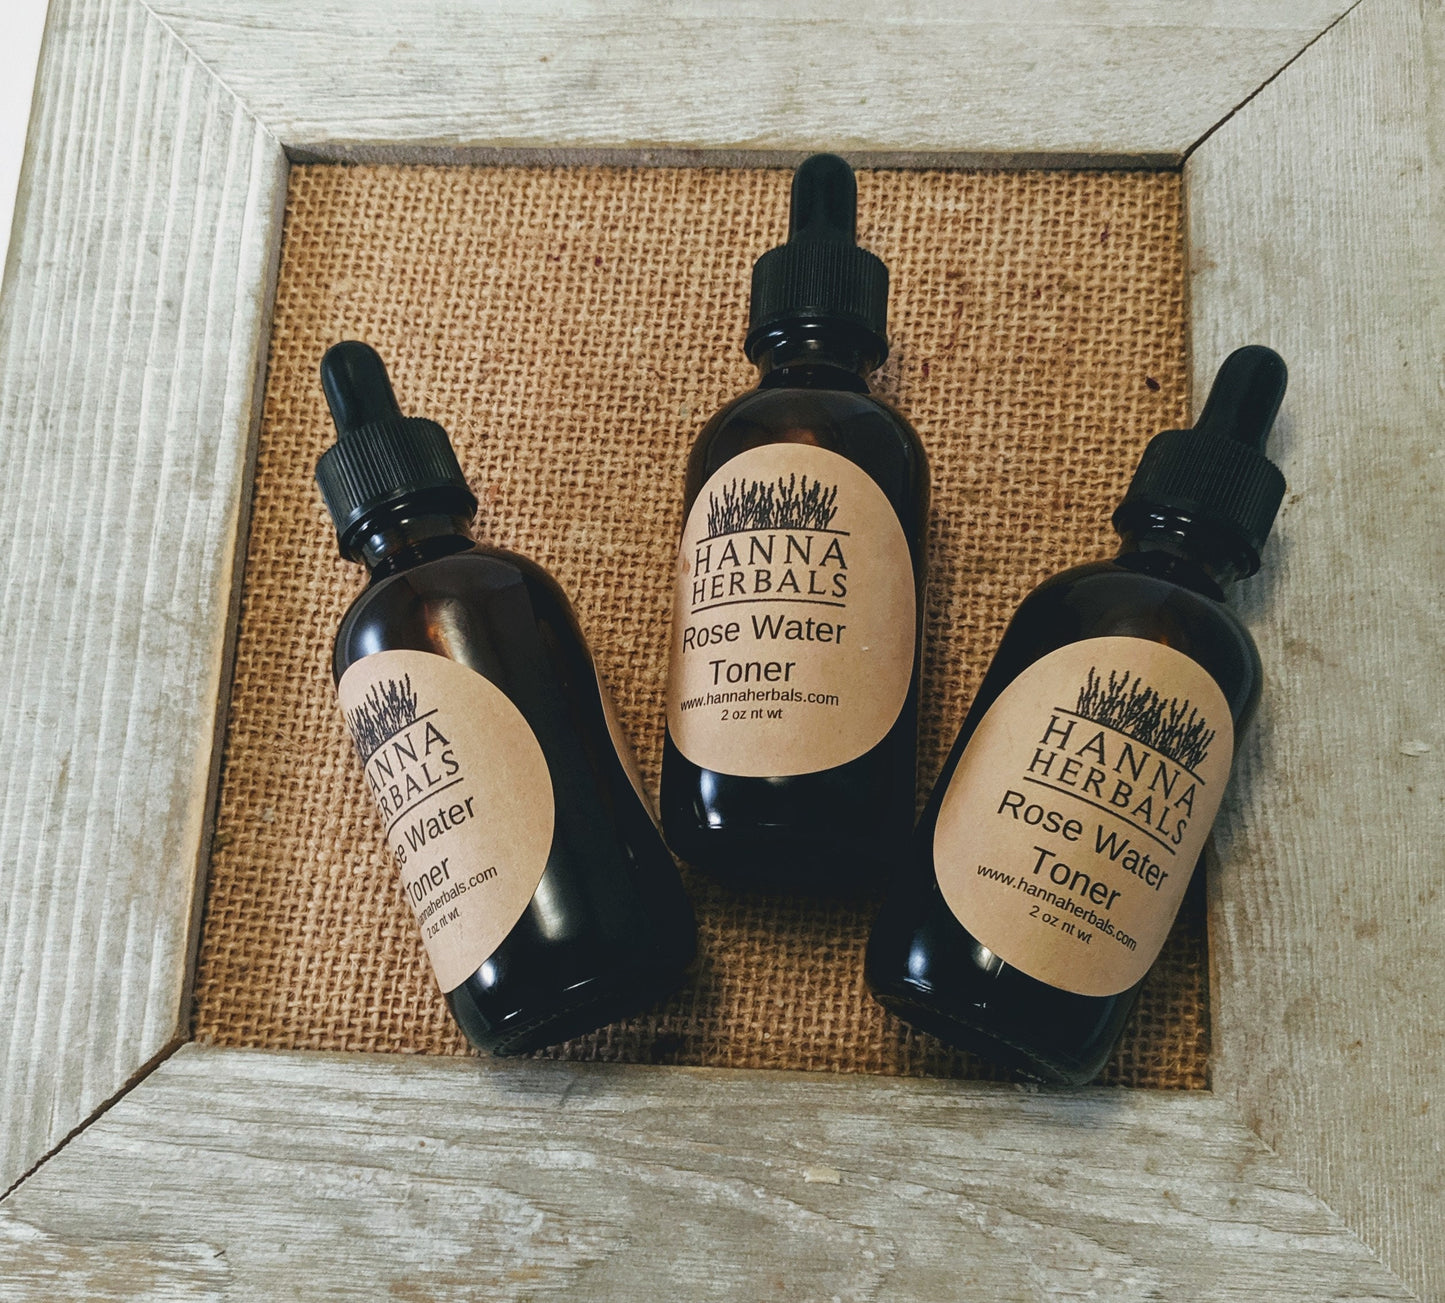 Rose Water Toner, Facial Toner, Hair Rinse, Bath Soak, Body Mist, Sustainable, Fair Trade, Eco Friendly, Old Fashioned, Skin Care,  selfcare